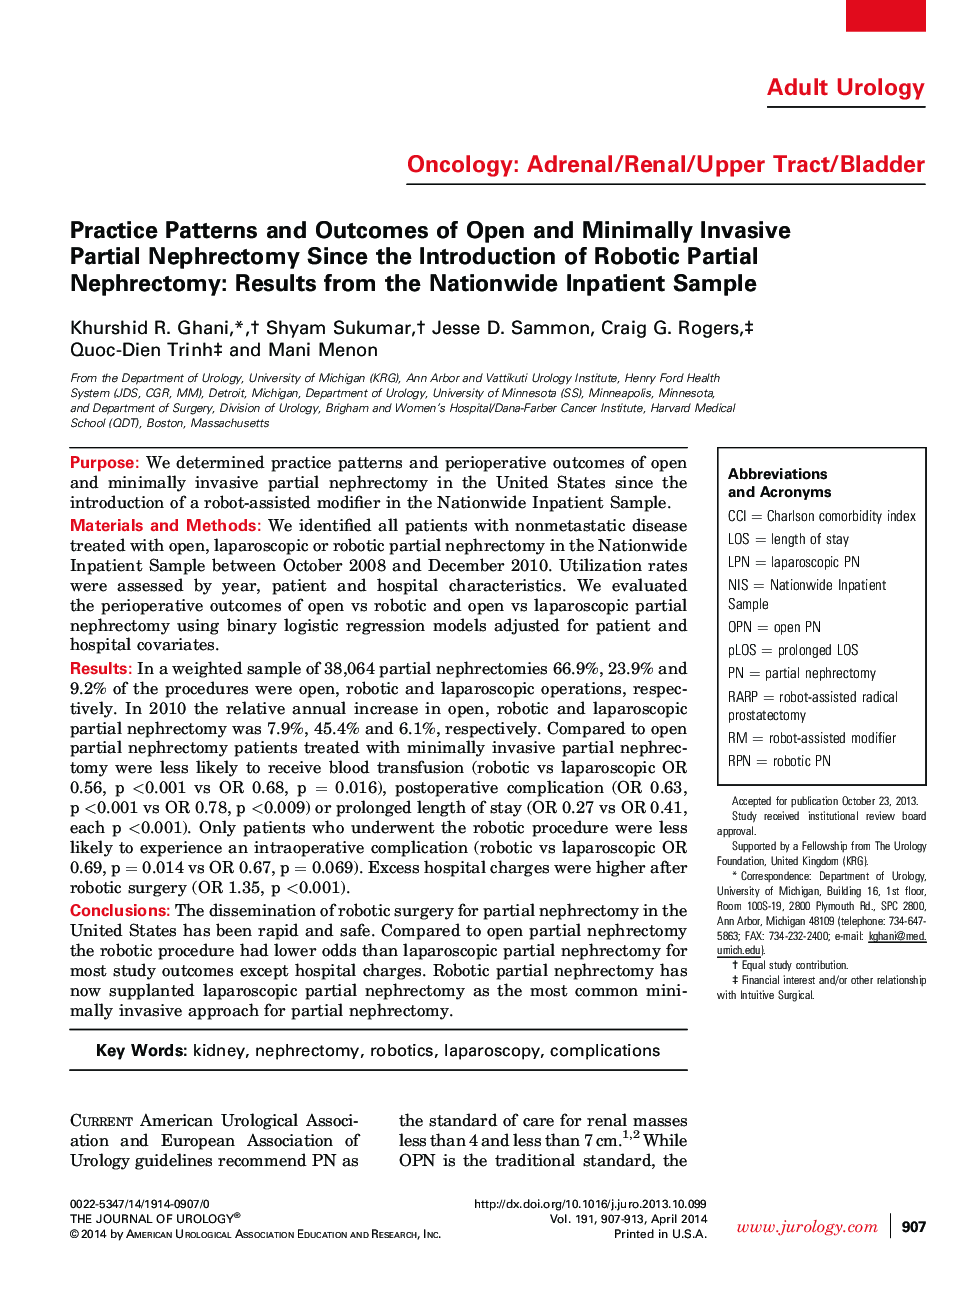 Practice Patterns and Outcomes of Open and Minimally Invasive Partial Nephrectomy Since the Introduction of Robotic Partial Nephrectomy: Results from the Nationwide Inpatient Sample 